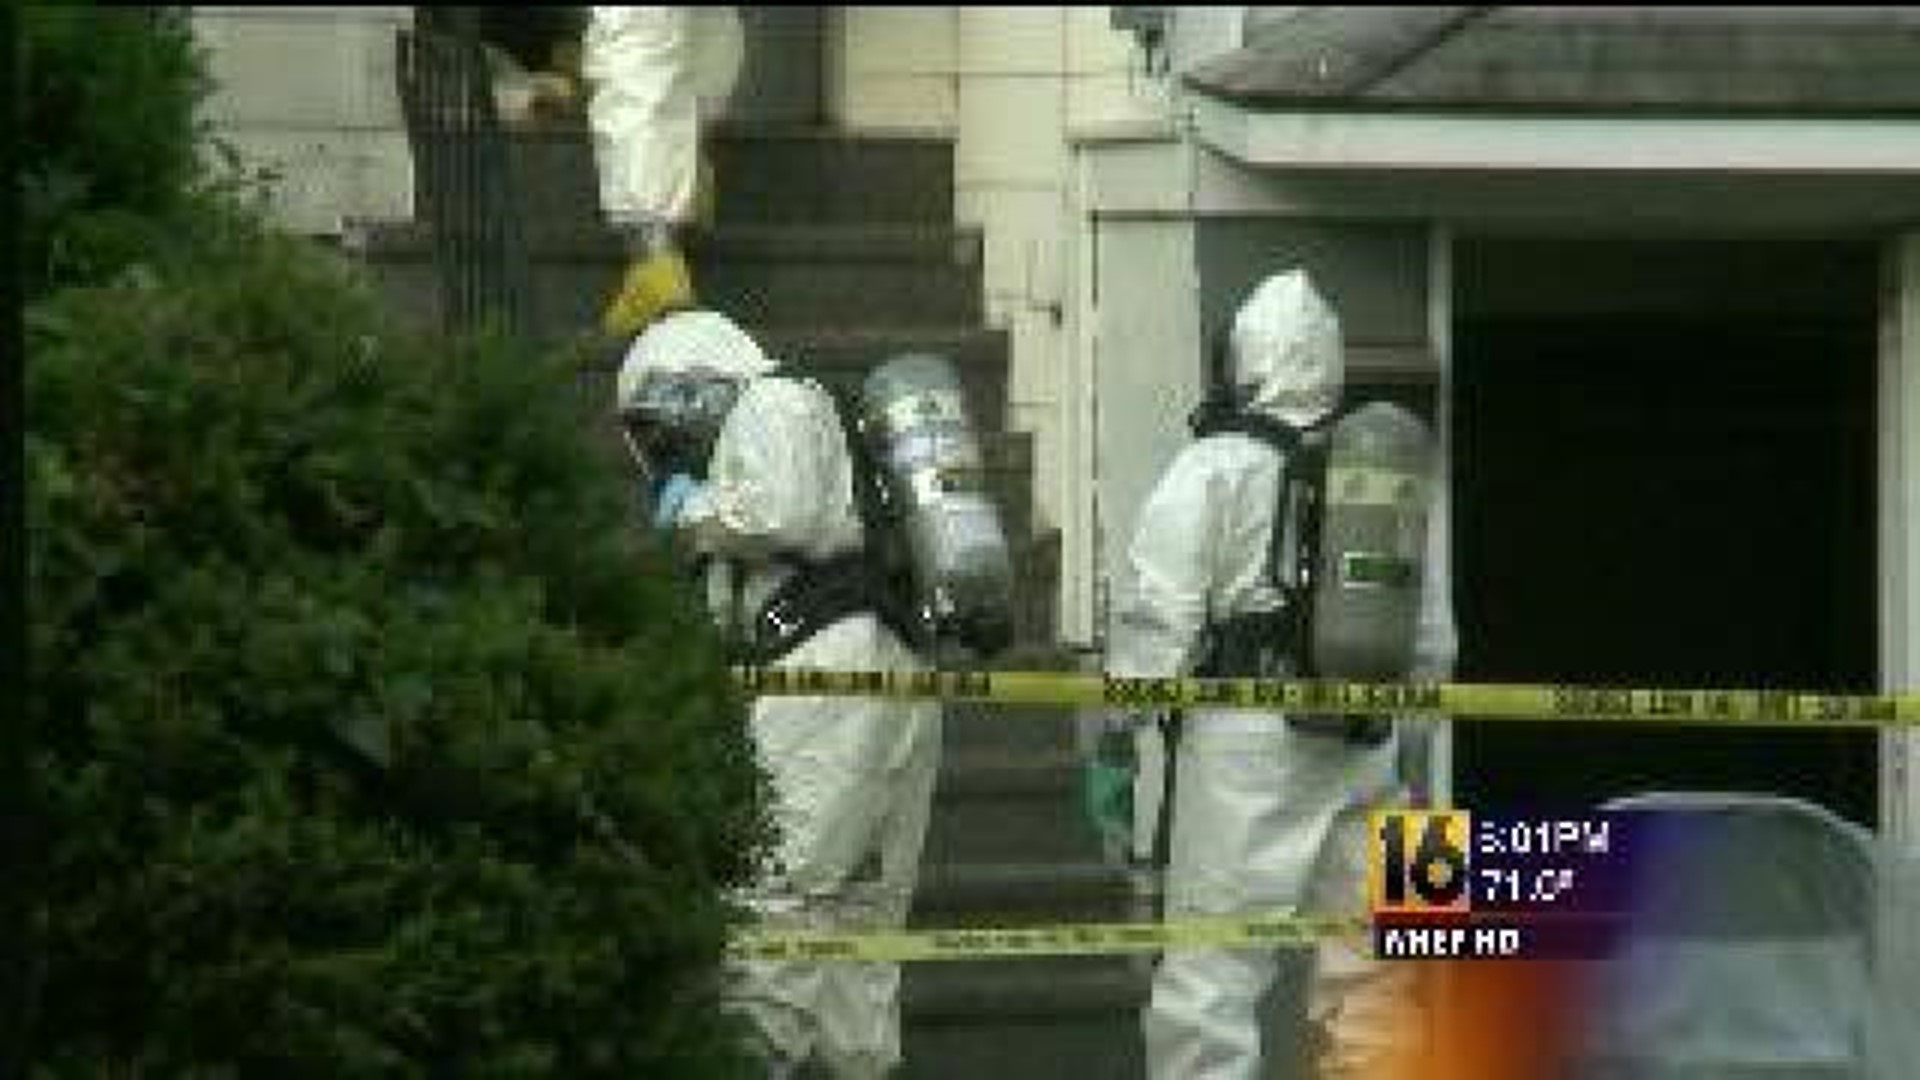 Meth Lab Found in Wilkes-Barre